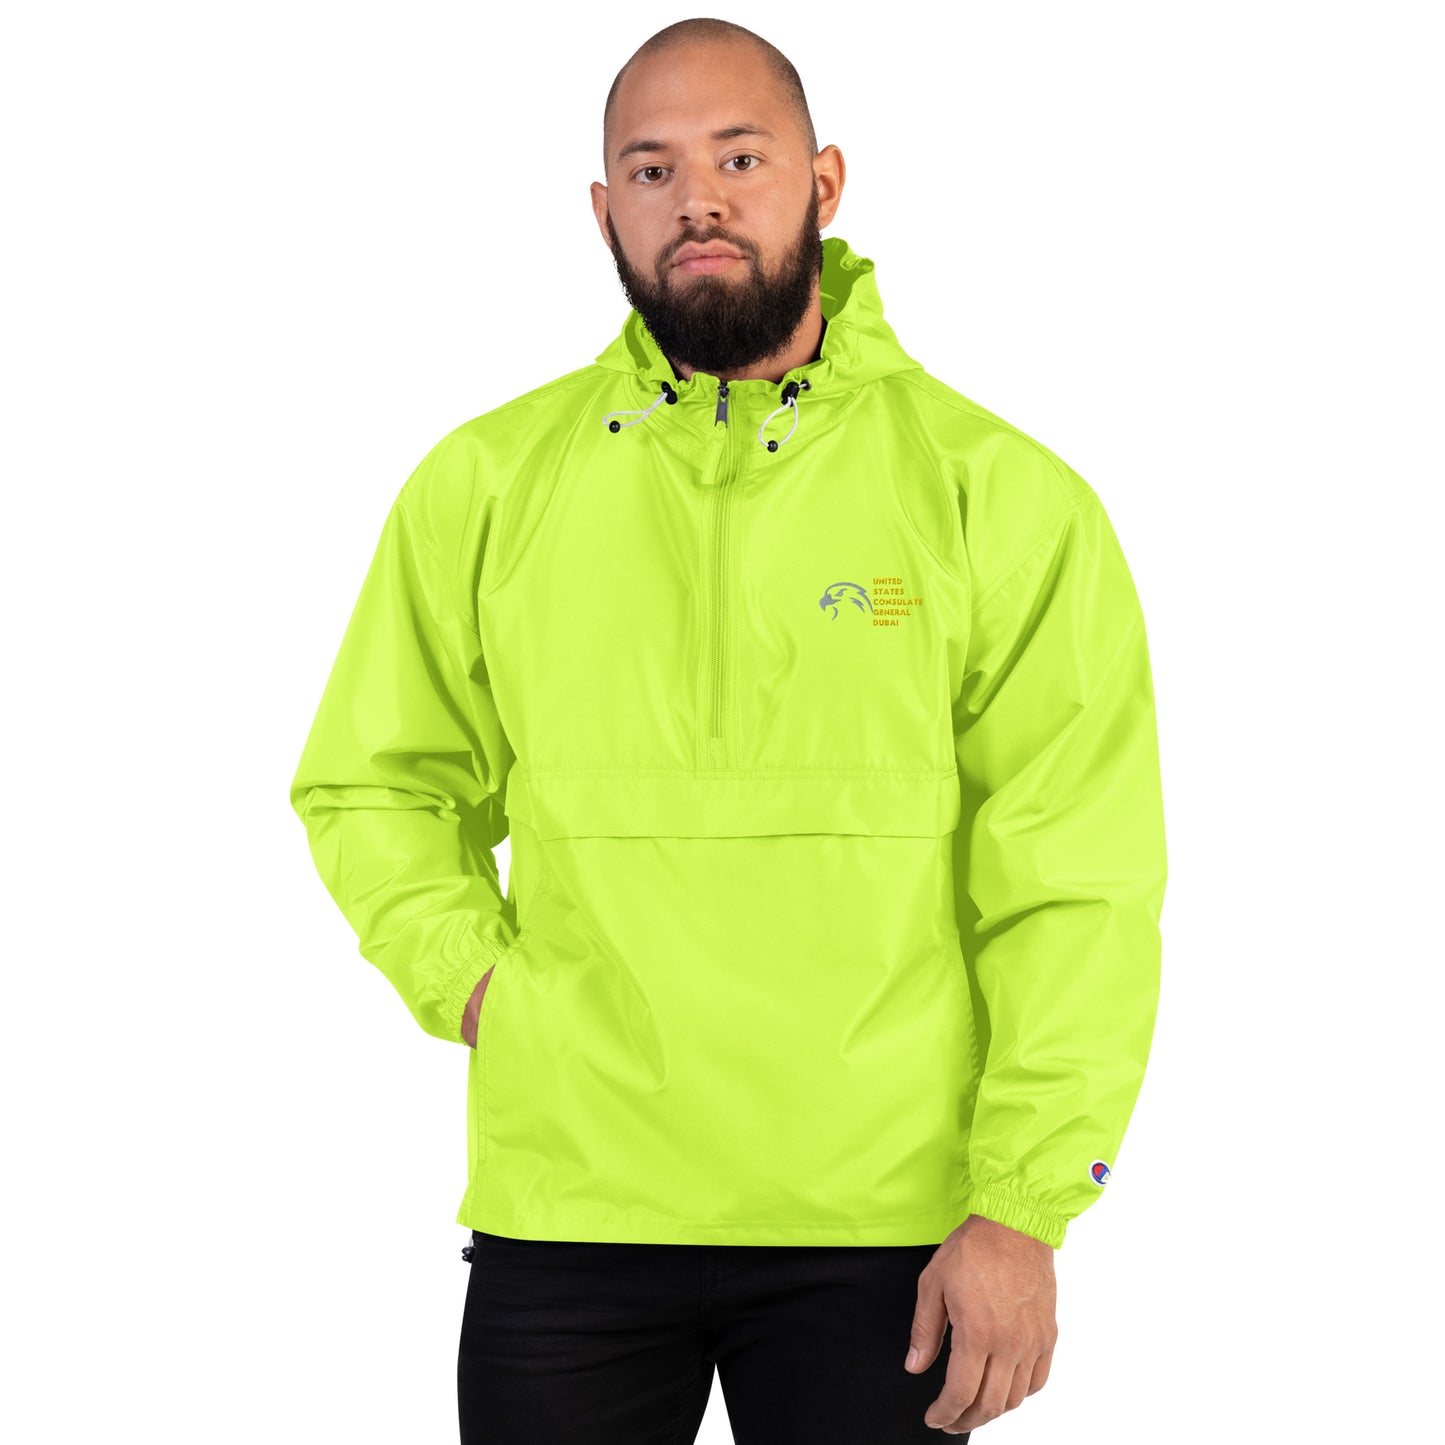 Champion Brand Embroidered Packable Jacket: Dubai